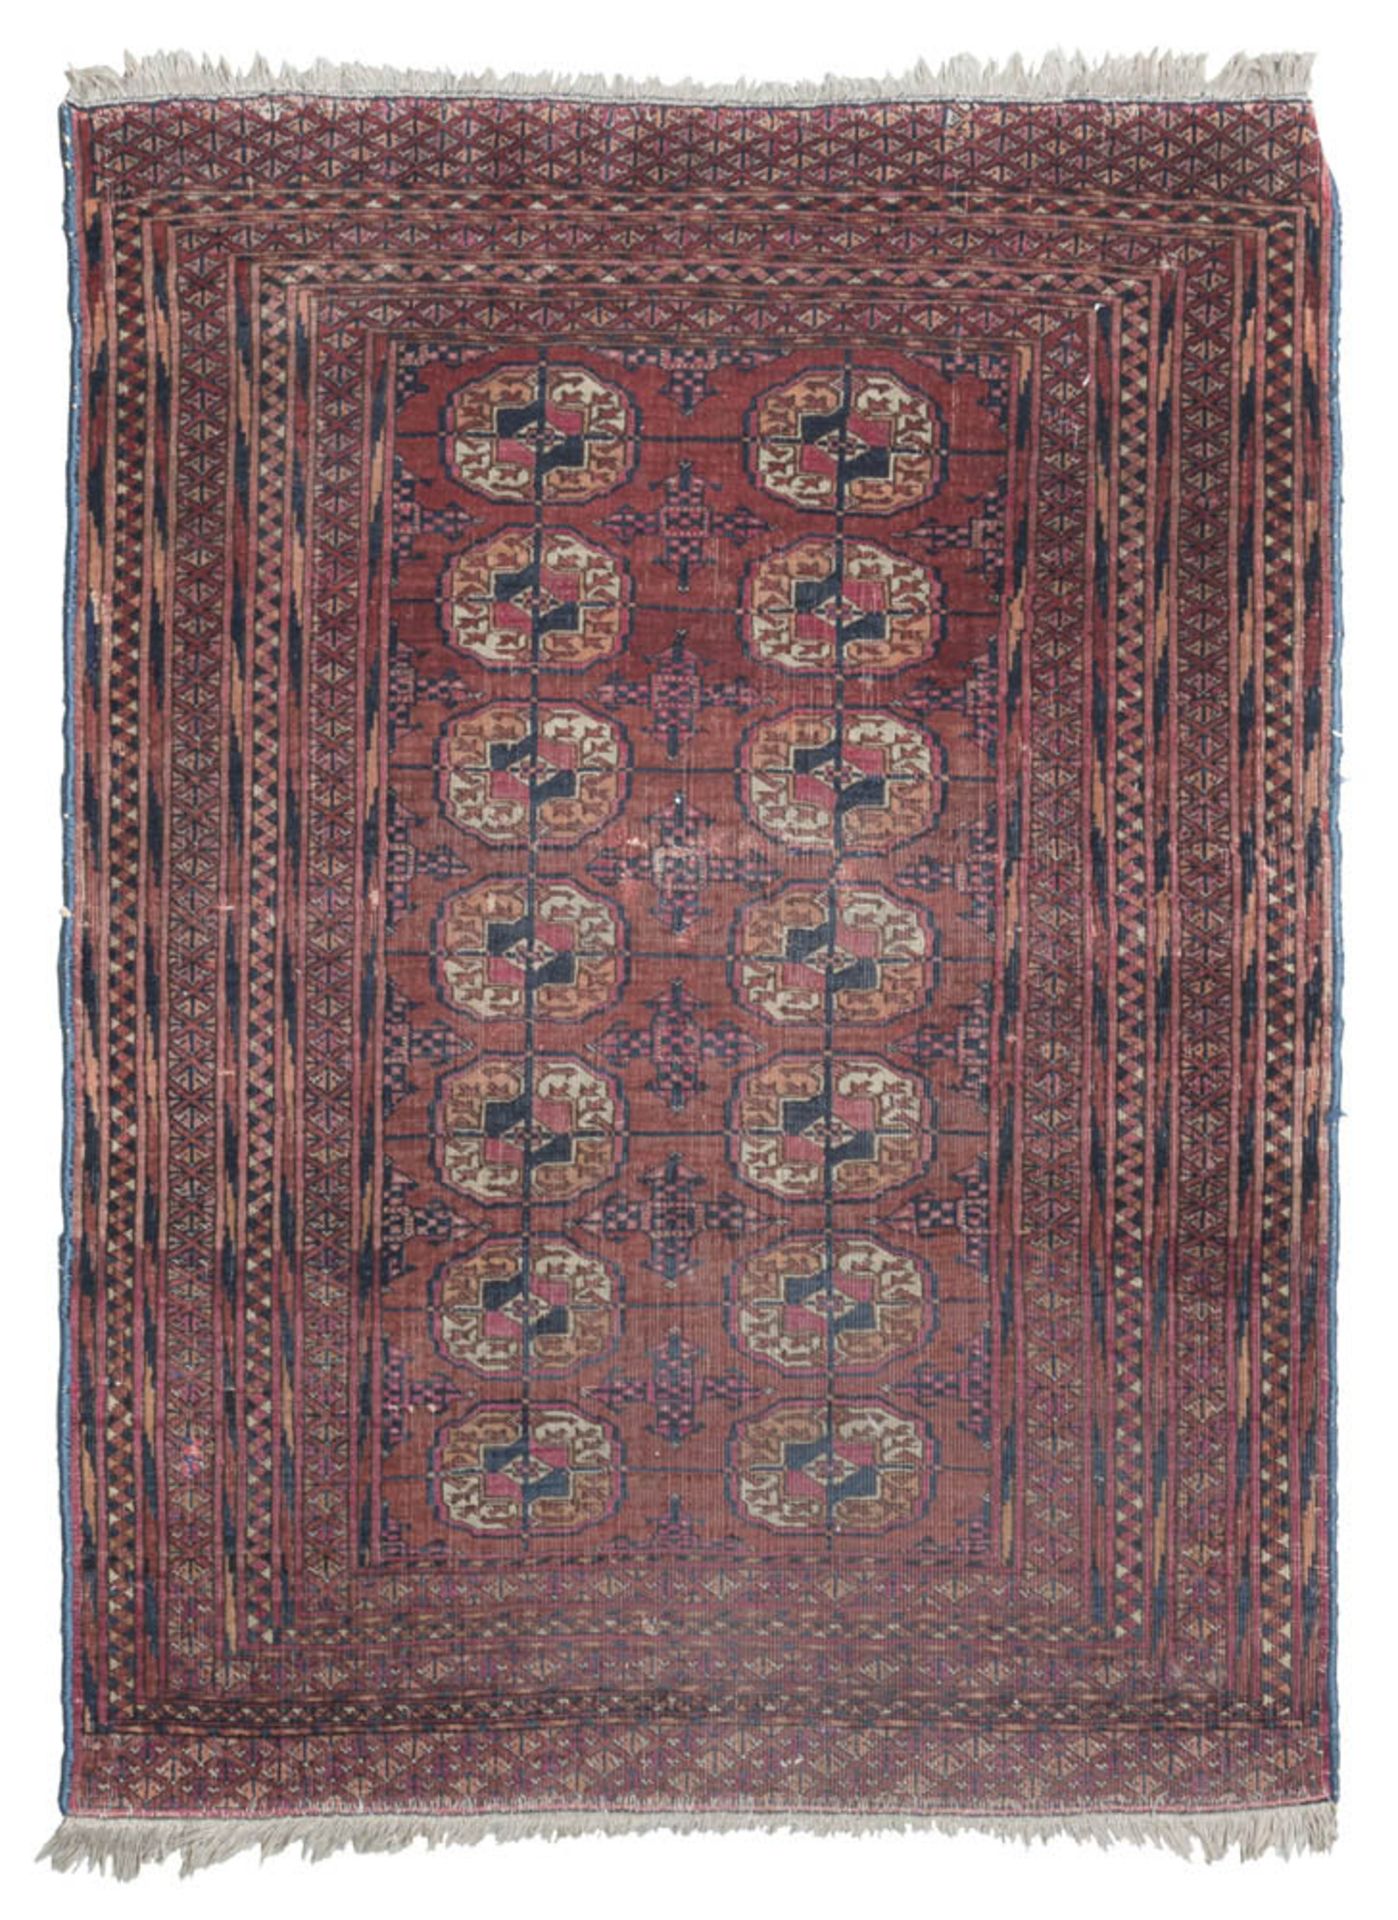 SMALL RUSSIAN BUKHARA CARPET, EARLY 20TH CENTURY with design in sequence and secondary motifs of